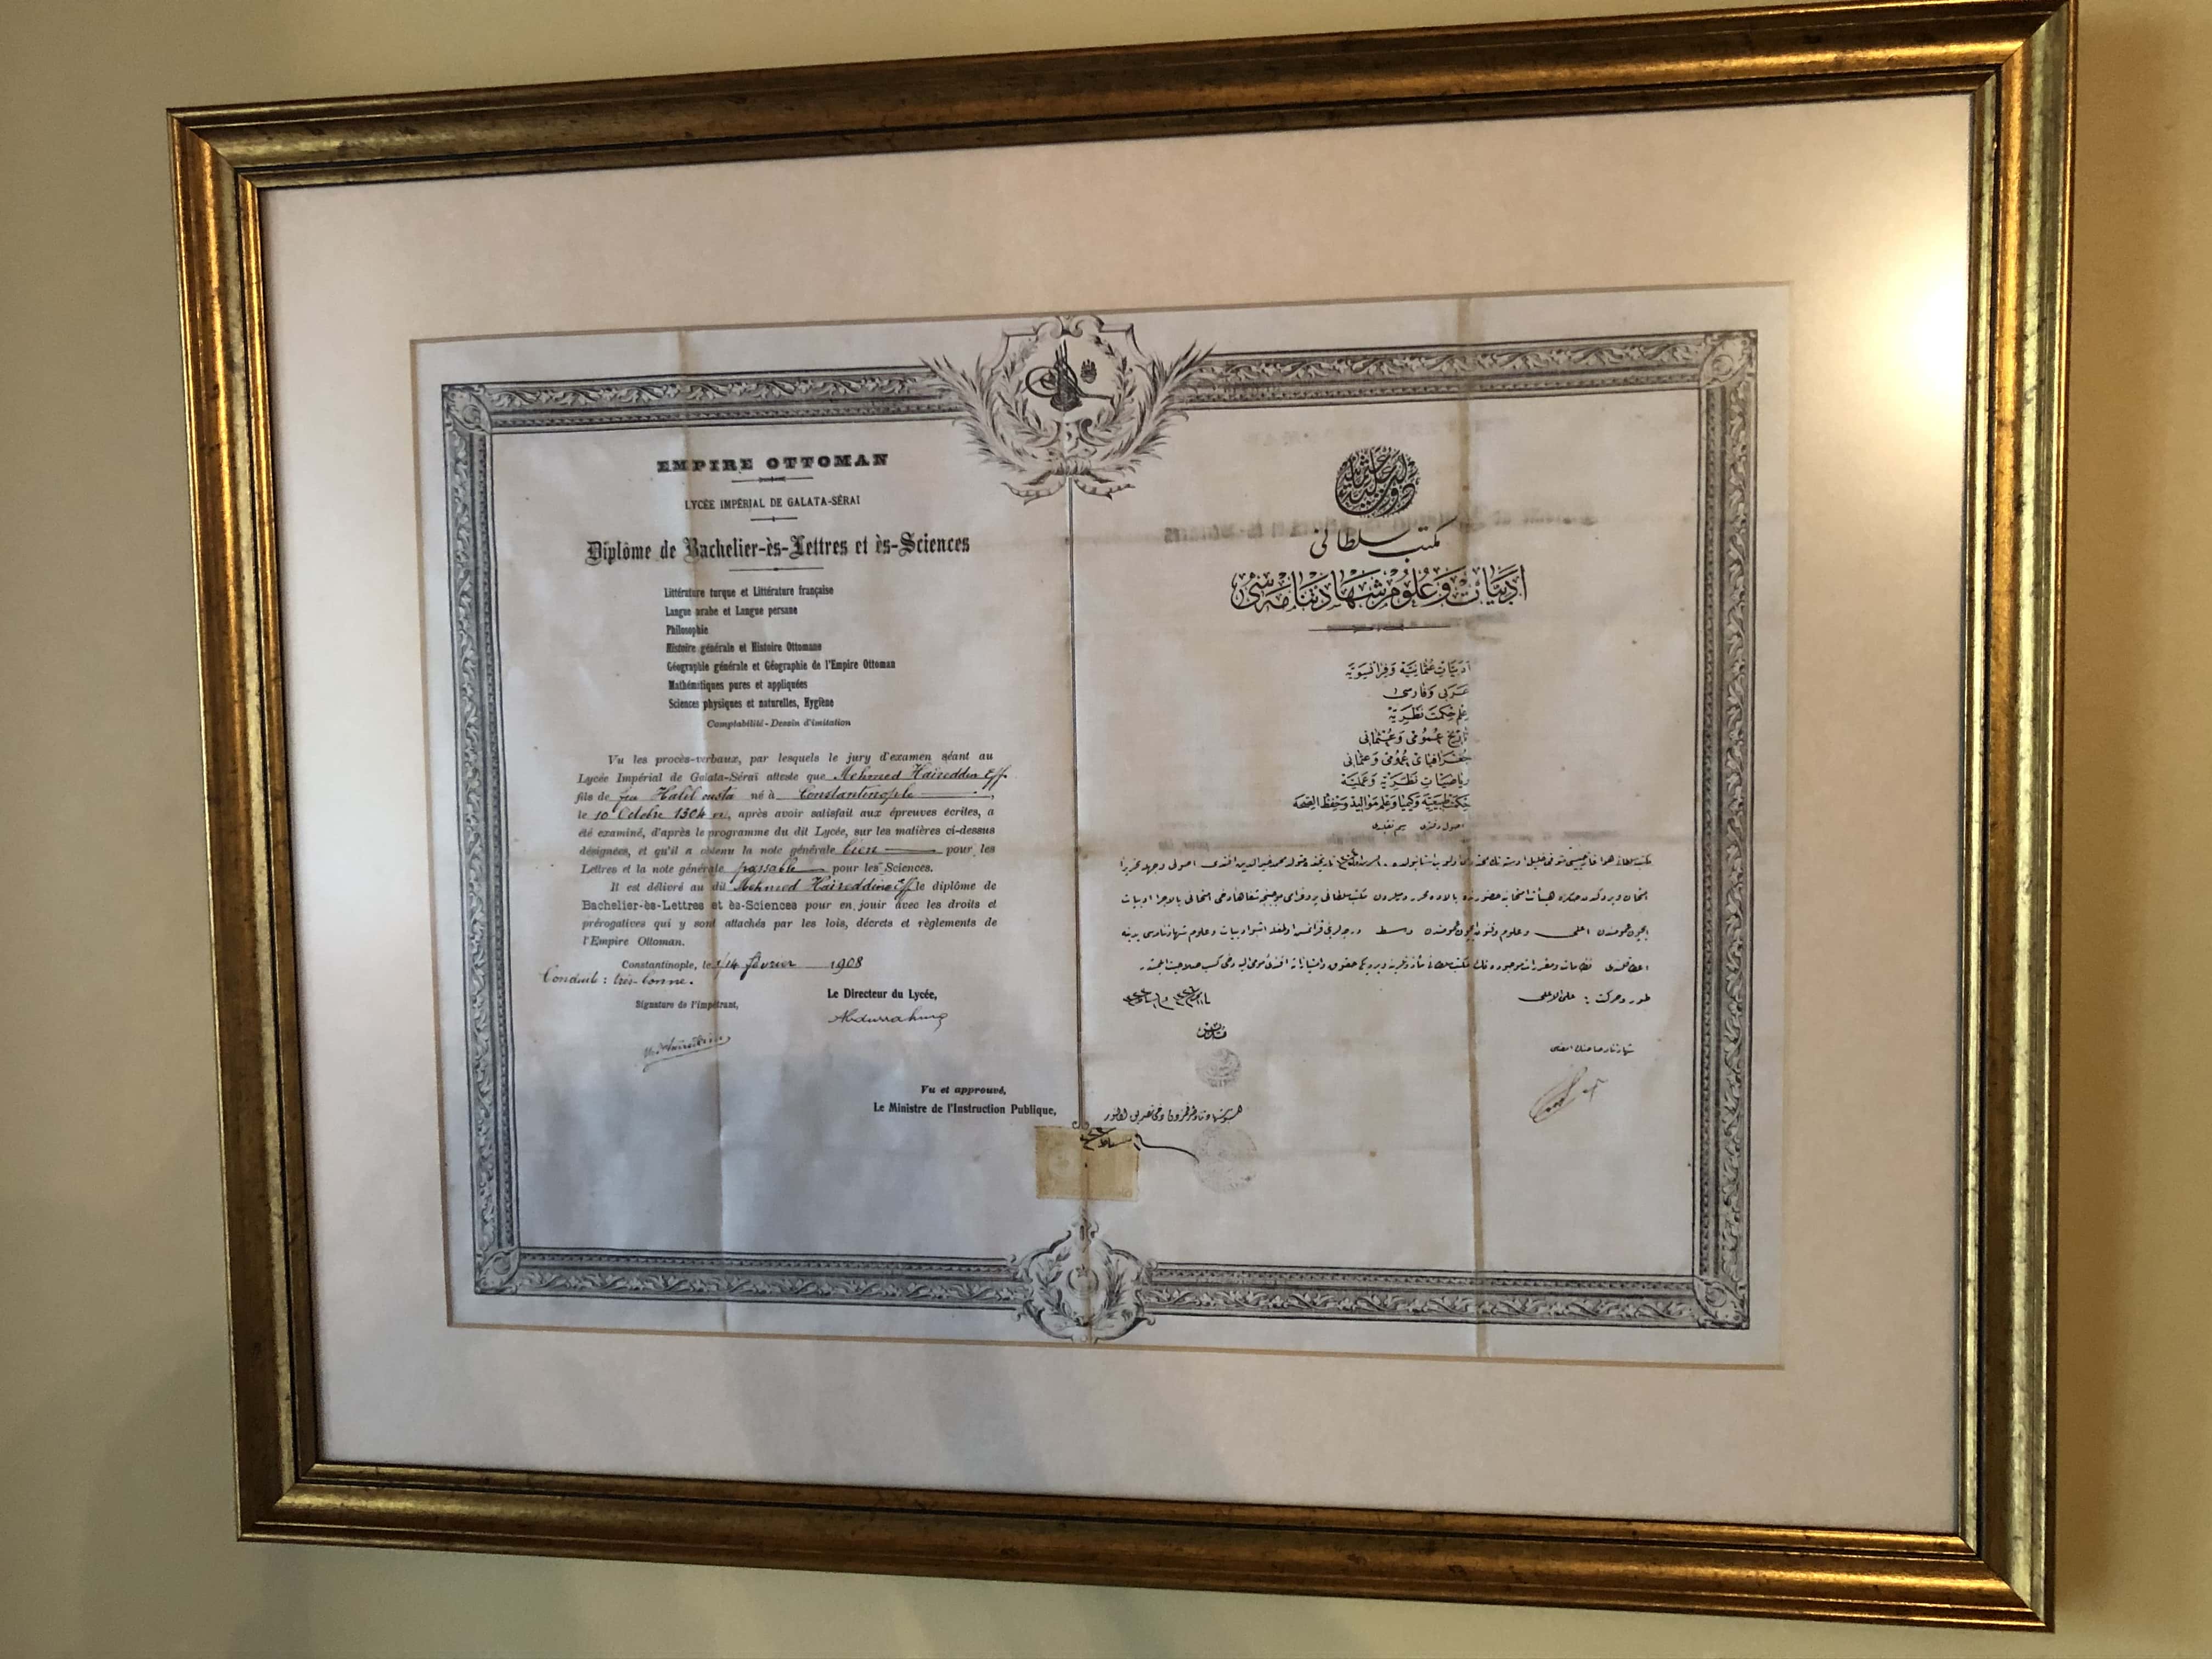 Diploma at the Galatasaray Museum in Istanbul, Turkey